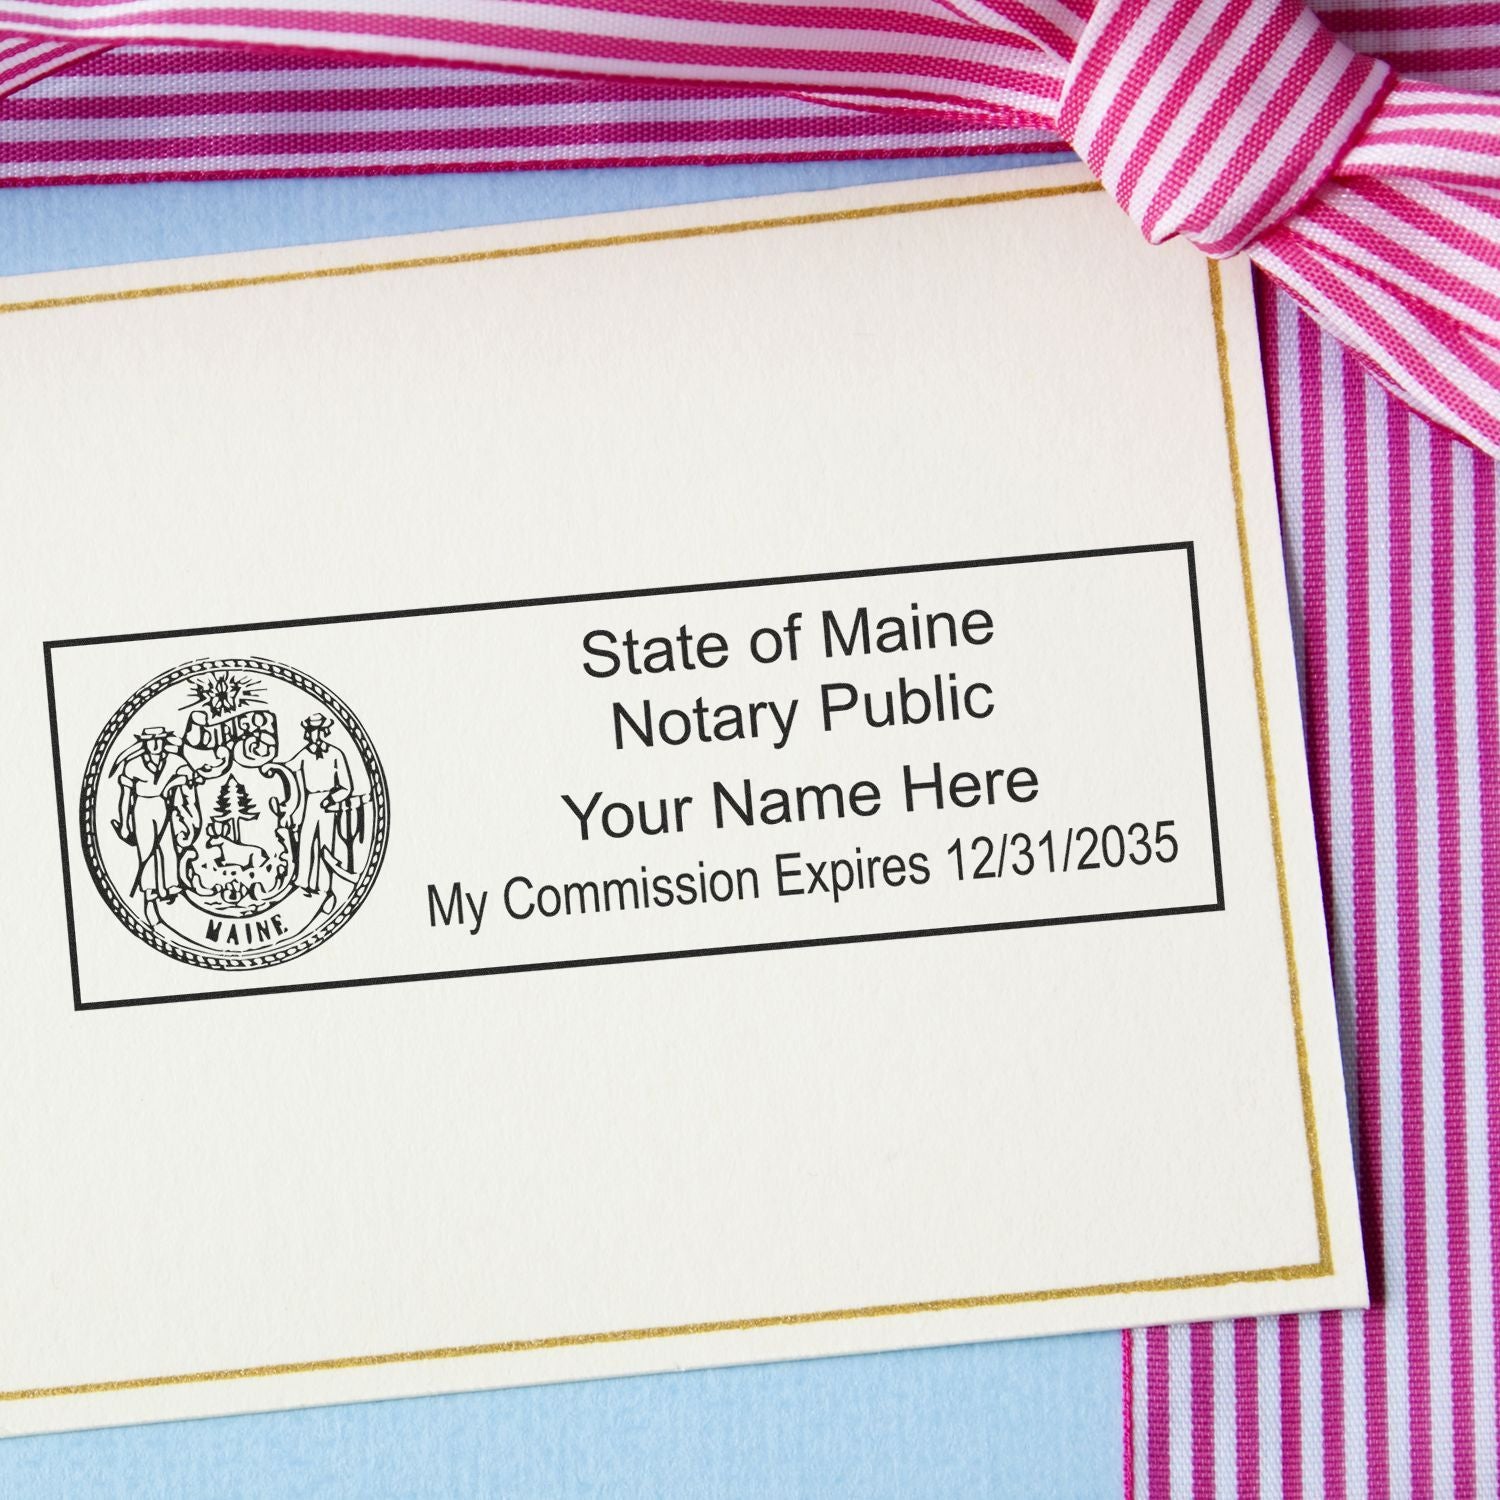 An alternative view of the PSI Maine Notary Stamp stamped on a sheet of paper showing the image in use